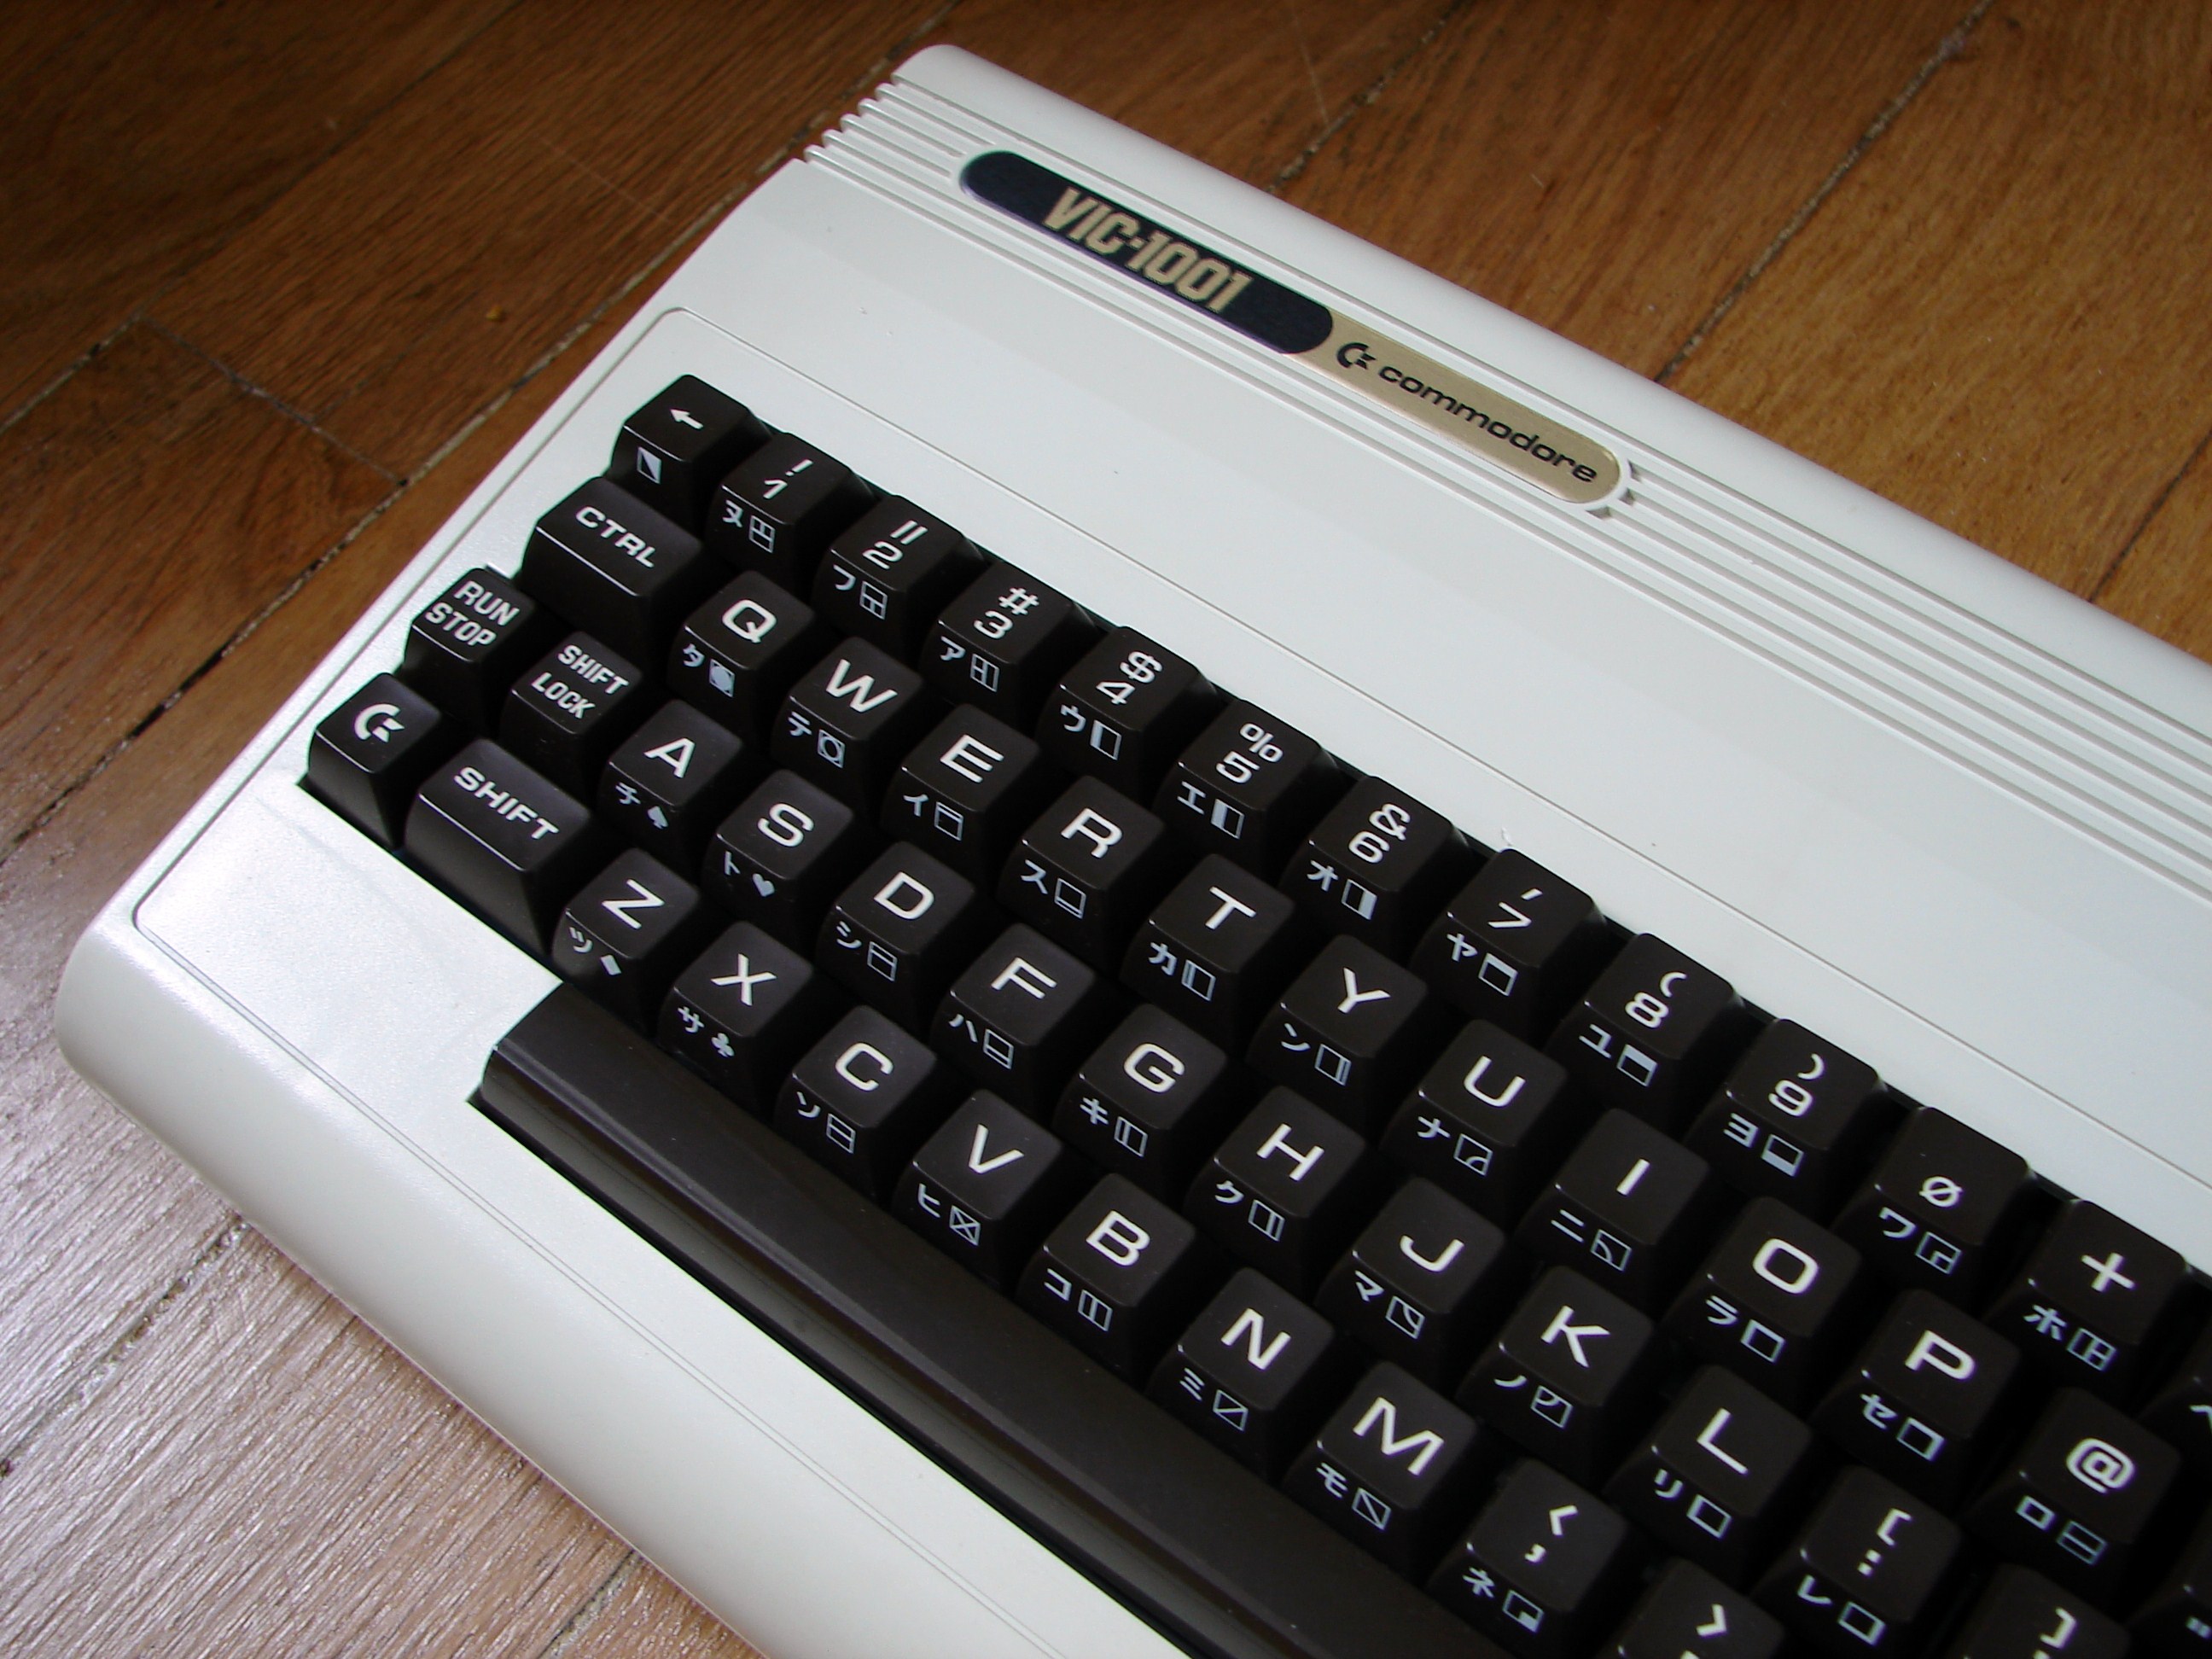 Tjeerd went from Commodore to Atari.